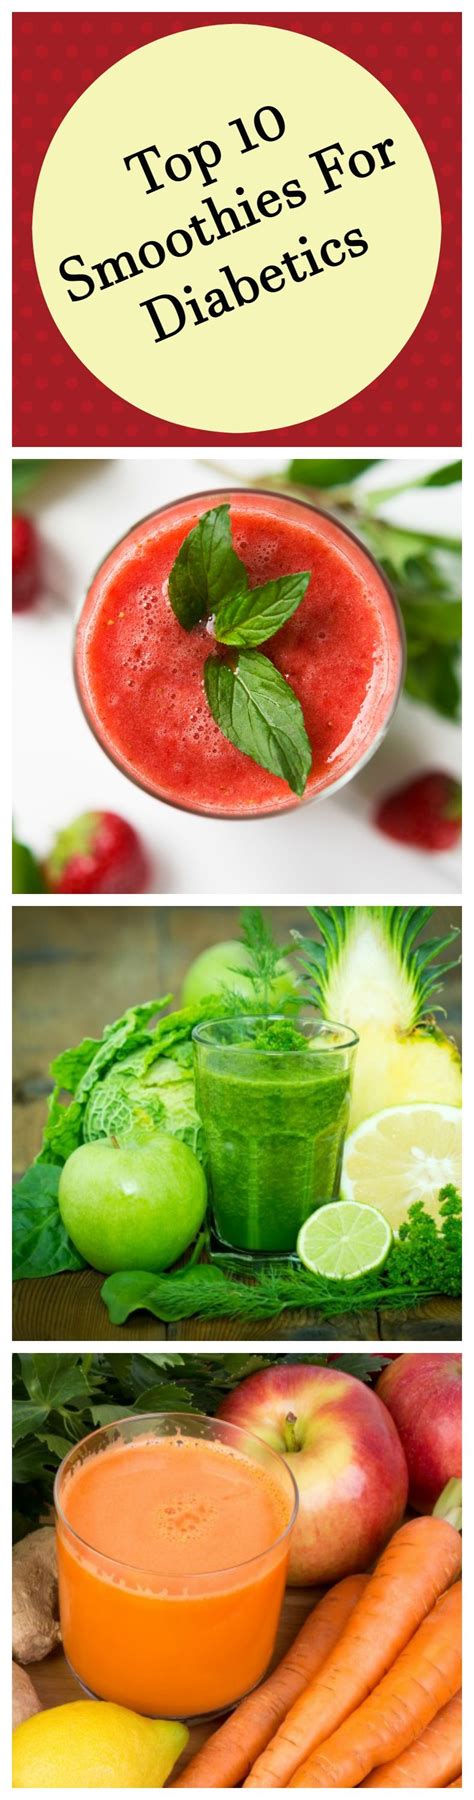 Coffee and protein weight loss smoothie recipe. 10 Delicious Smoothies for Diabetics - All Nutribullet Recipes | Diabetic smoothies, Diabetic ...